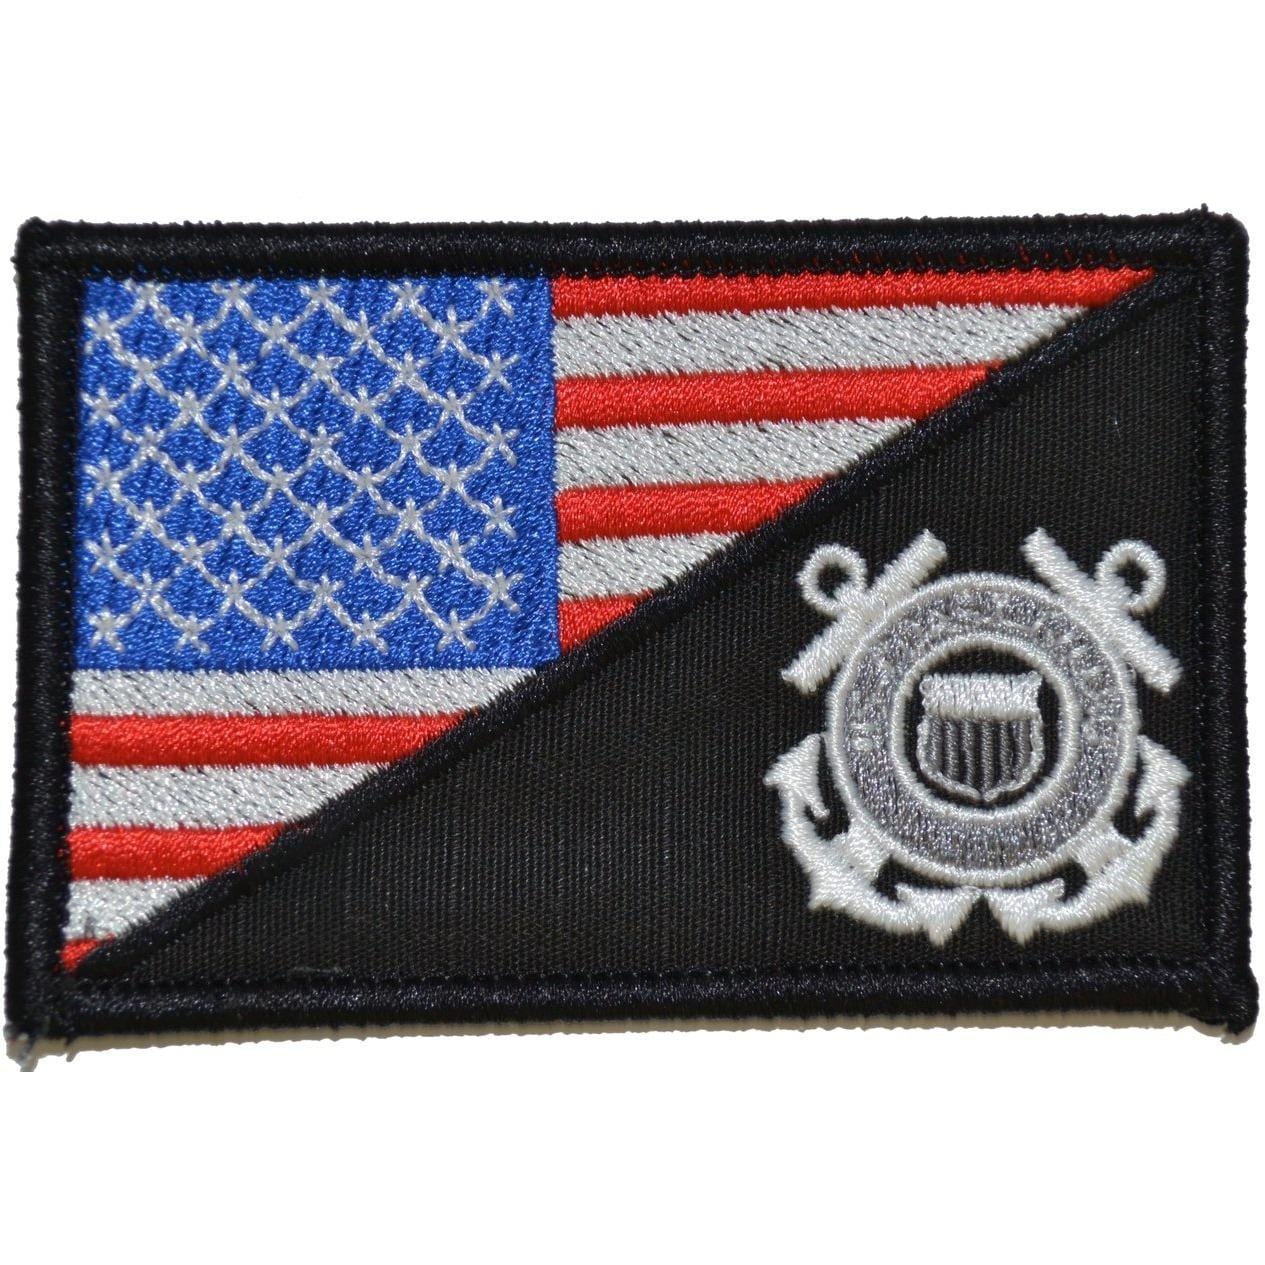 Tactical Gear Junkie Patches Full Color Coast Guard USA Flag - 2.25x3.5 Patch